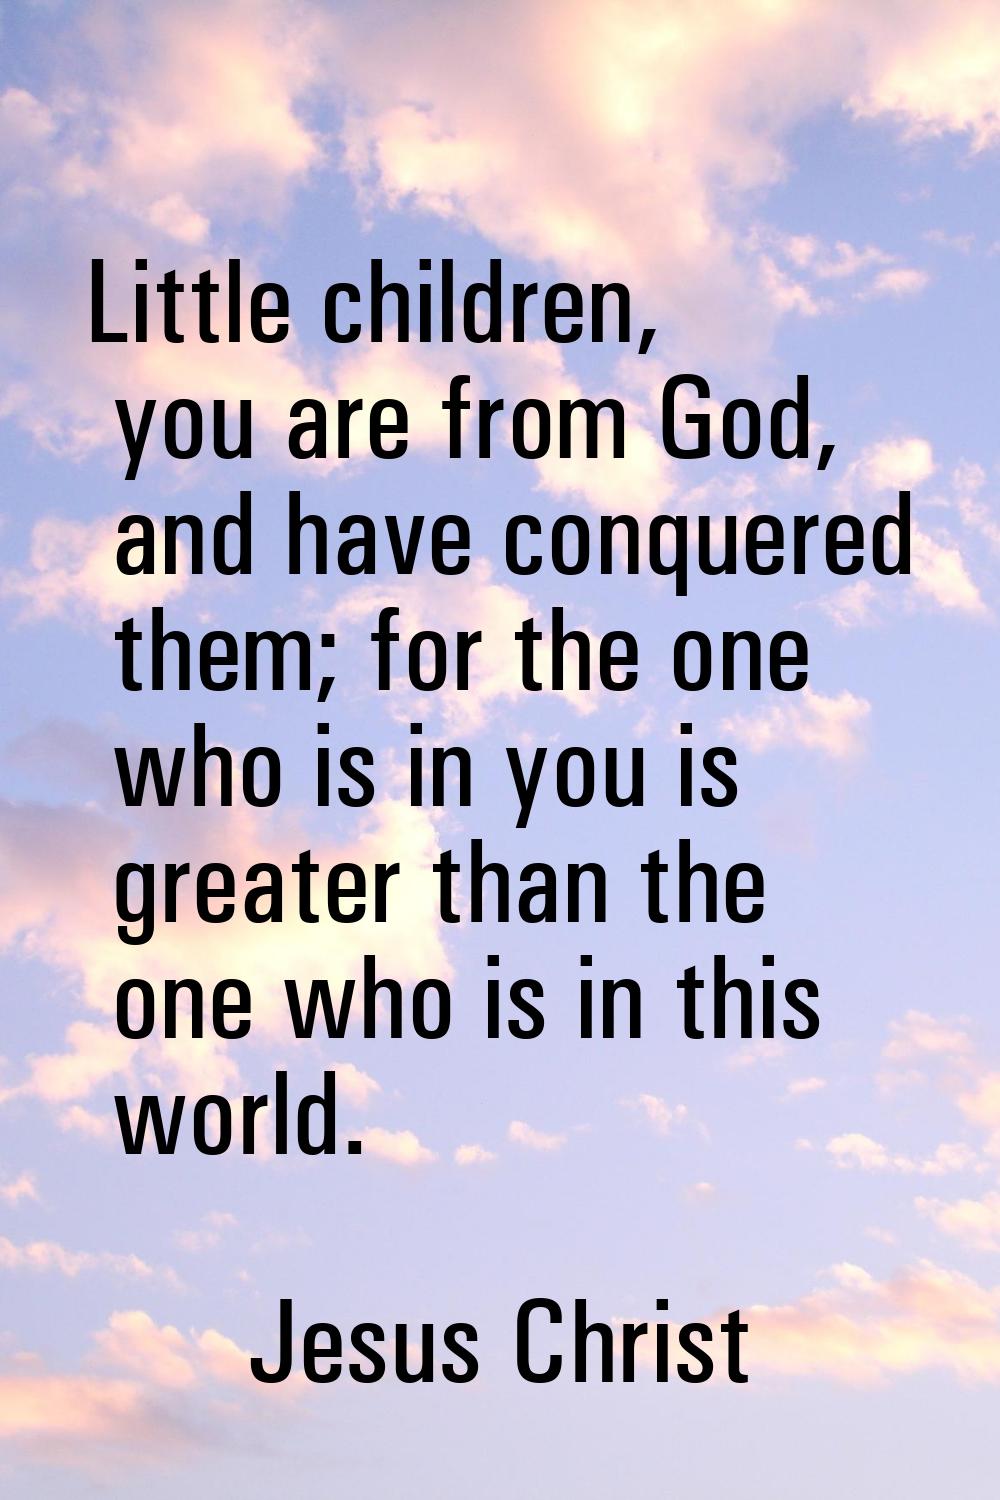 Little children, you are from God, and have conquered them; for the one who is in you is greater th